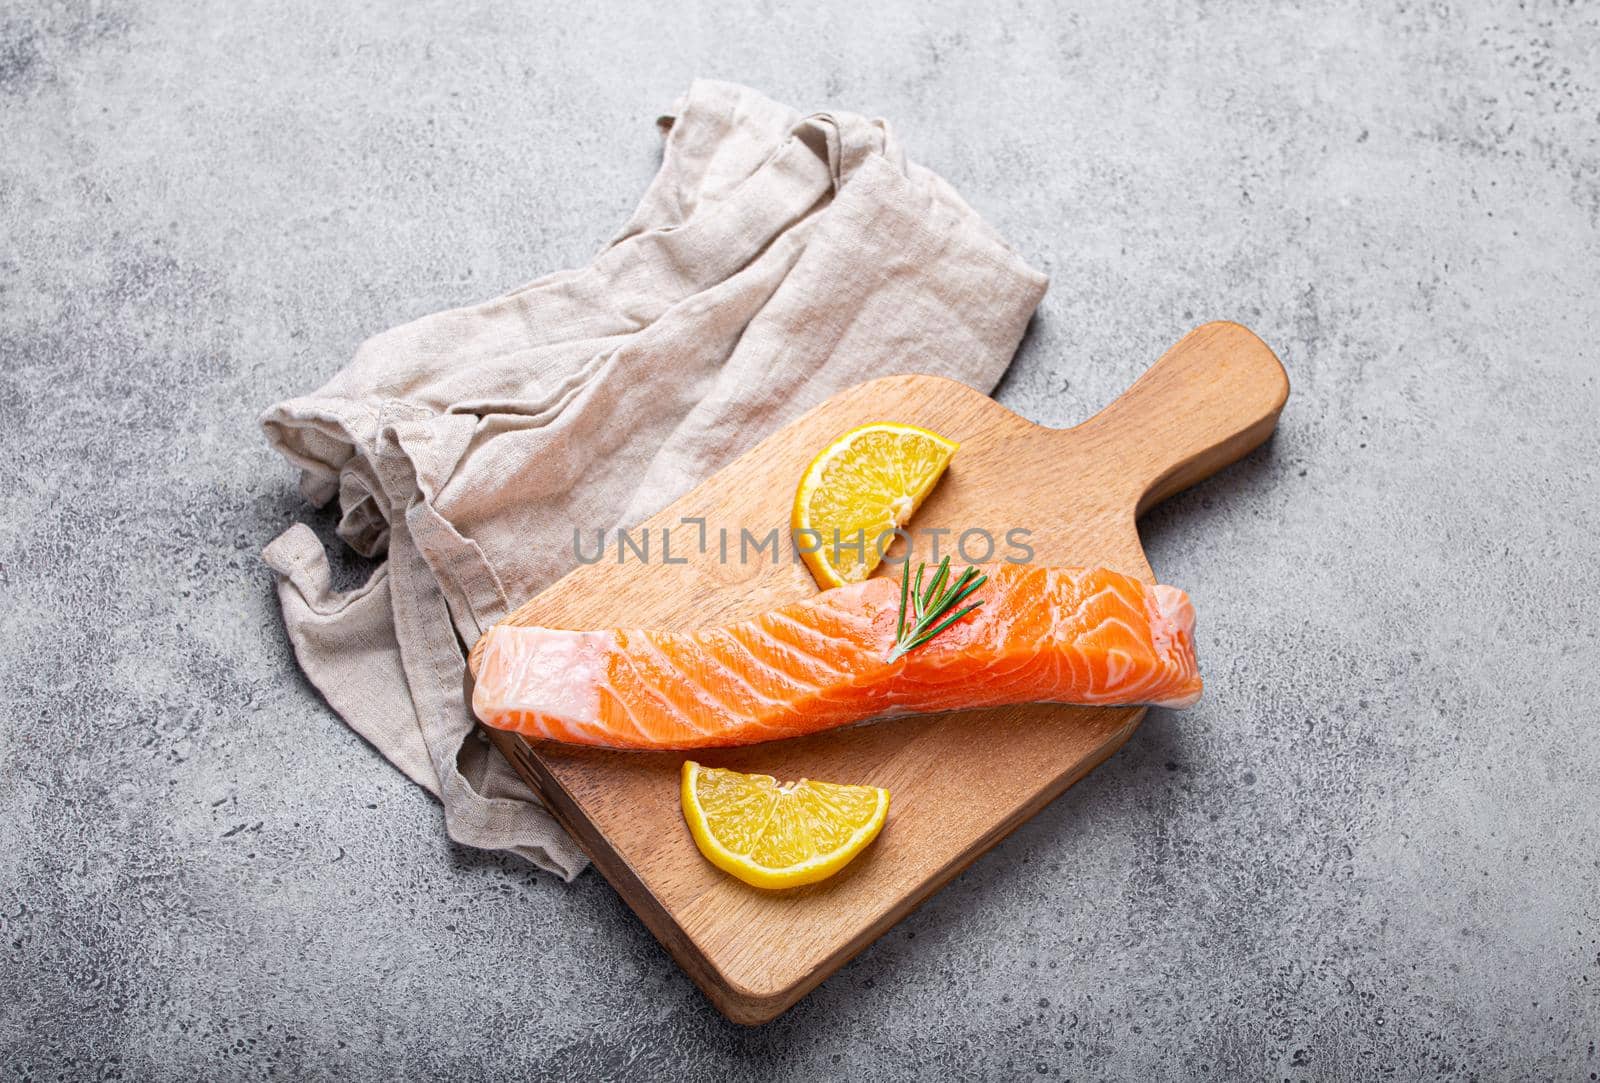 Raw salmon fish fillet with lemon wedges and rosemary on wooden cutting board by its_al_dente